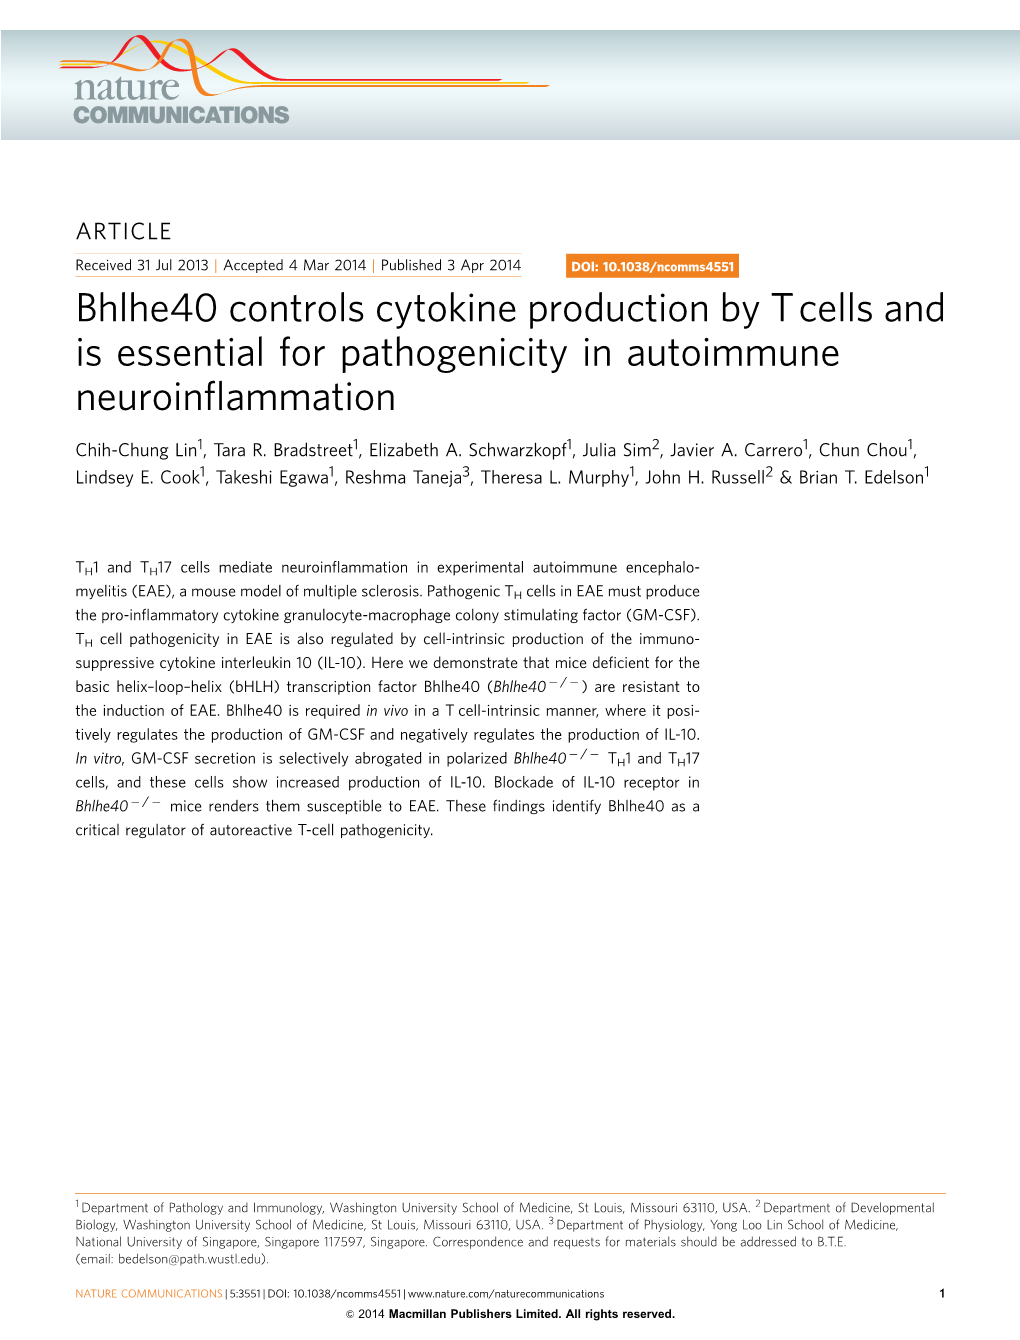 Bhlhe40 Controls Cytokine Production by T Cells and Is Essential for Pathogenicity in Autoimmune Neuroinflammation